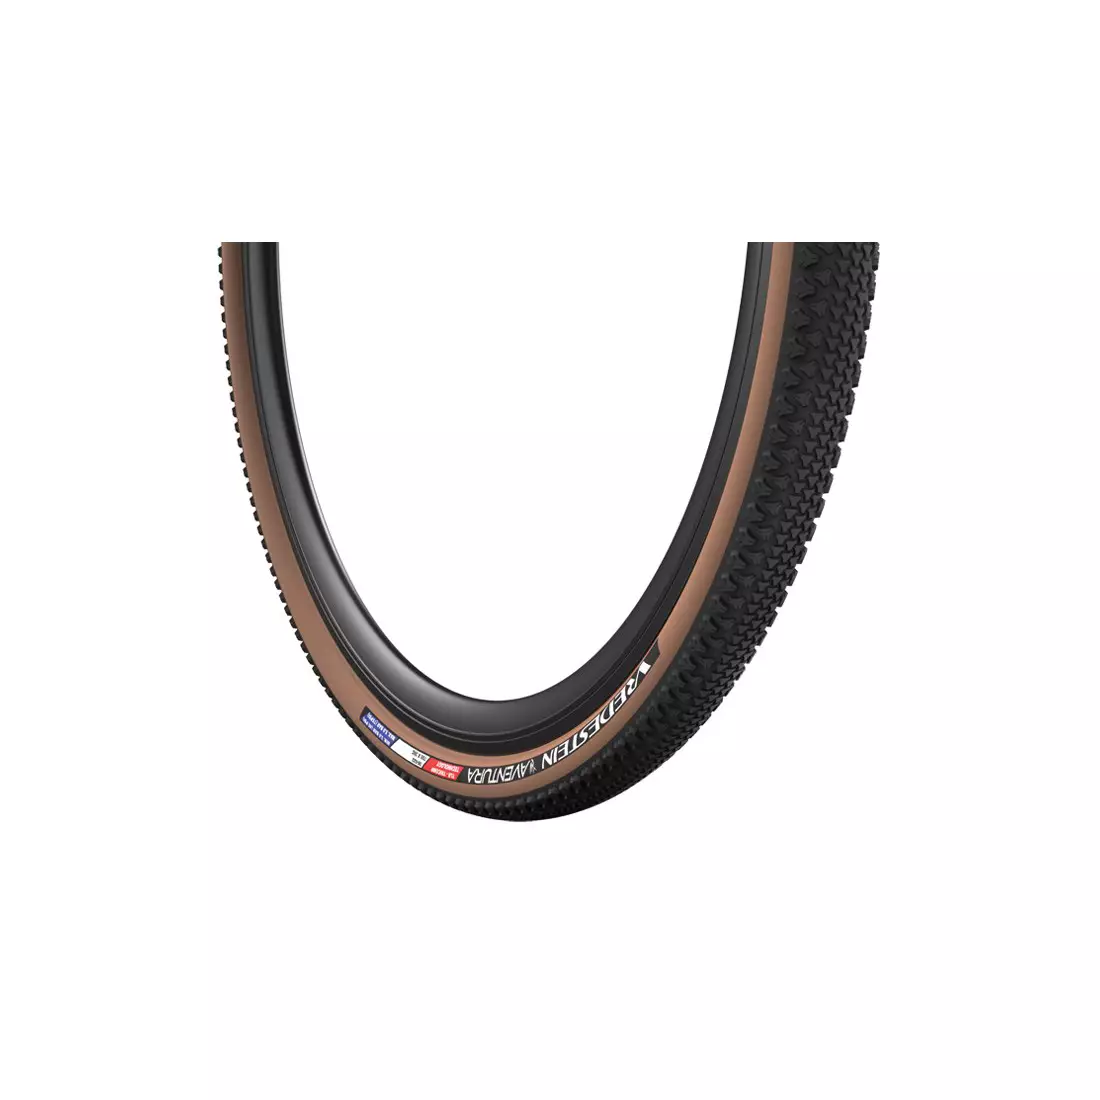 VREDESTEIN gravel bicycle tire aventura 700x38 (38-622) tubeless ready brown VRD-28170